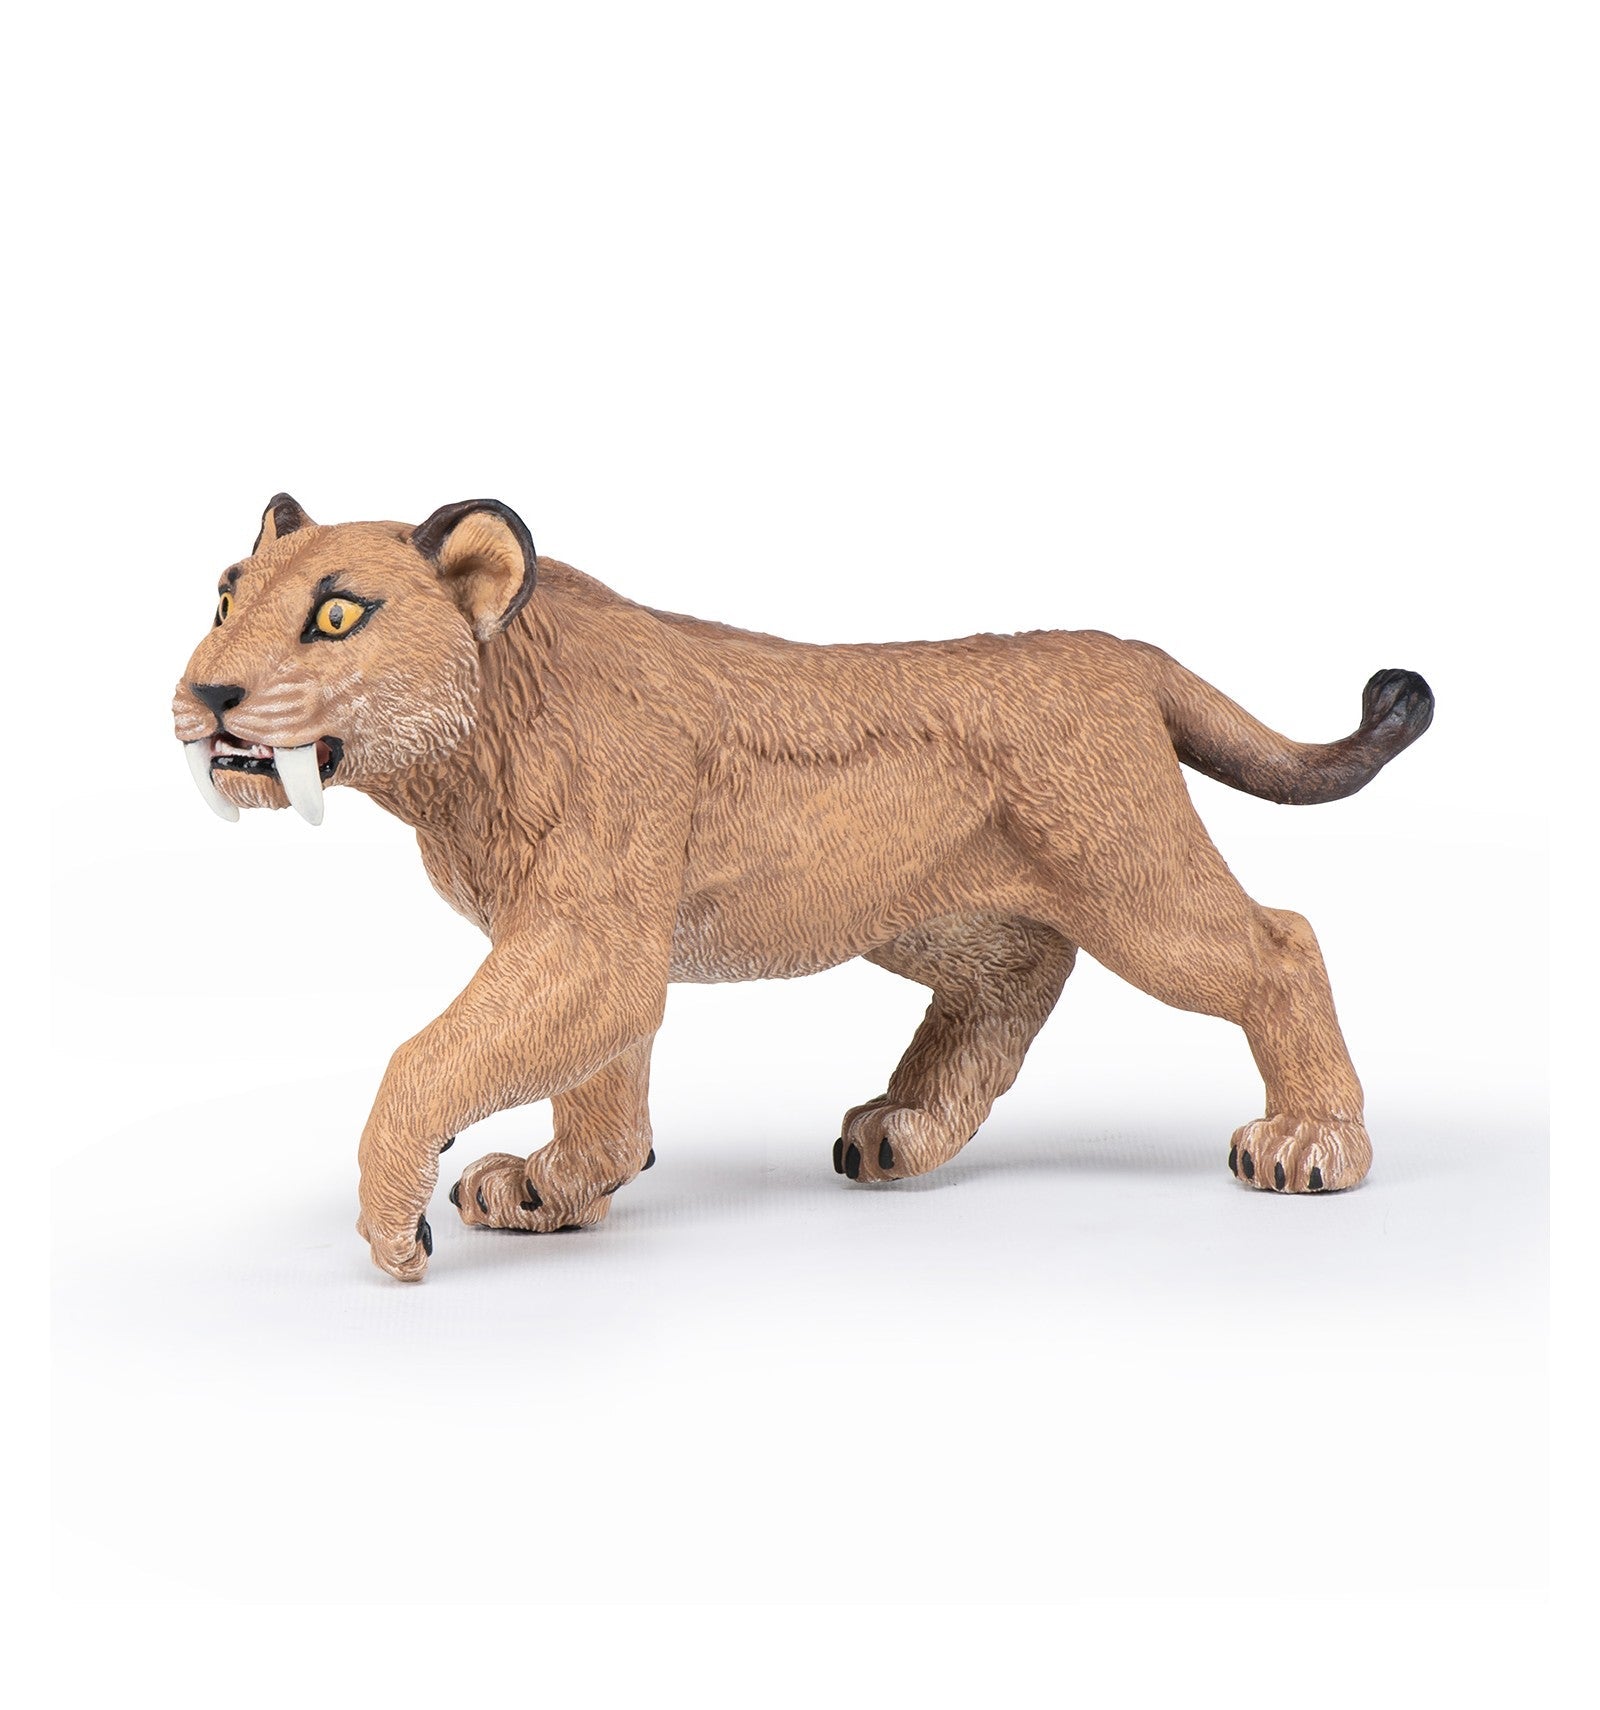 Young Smilodon